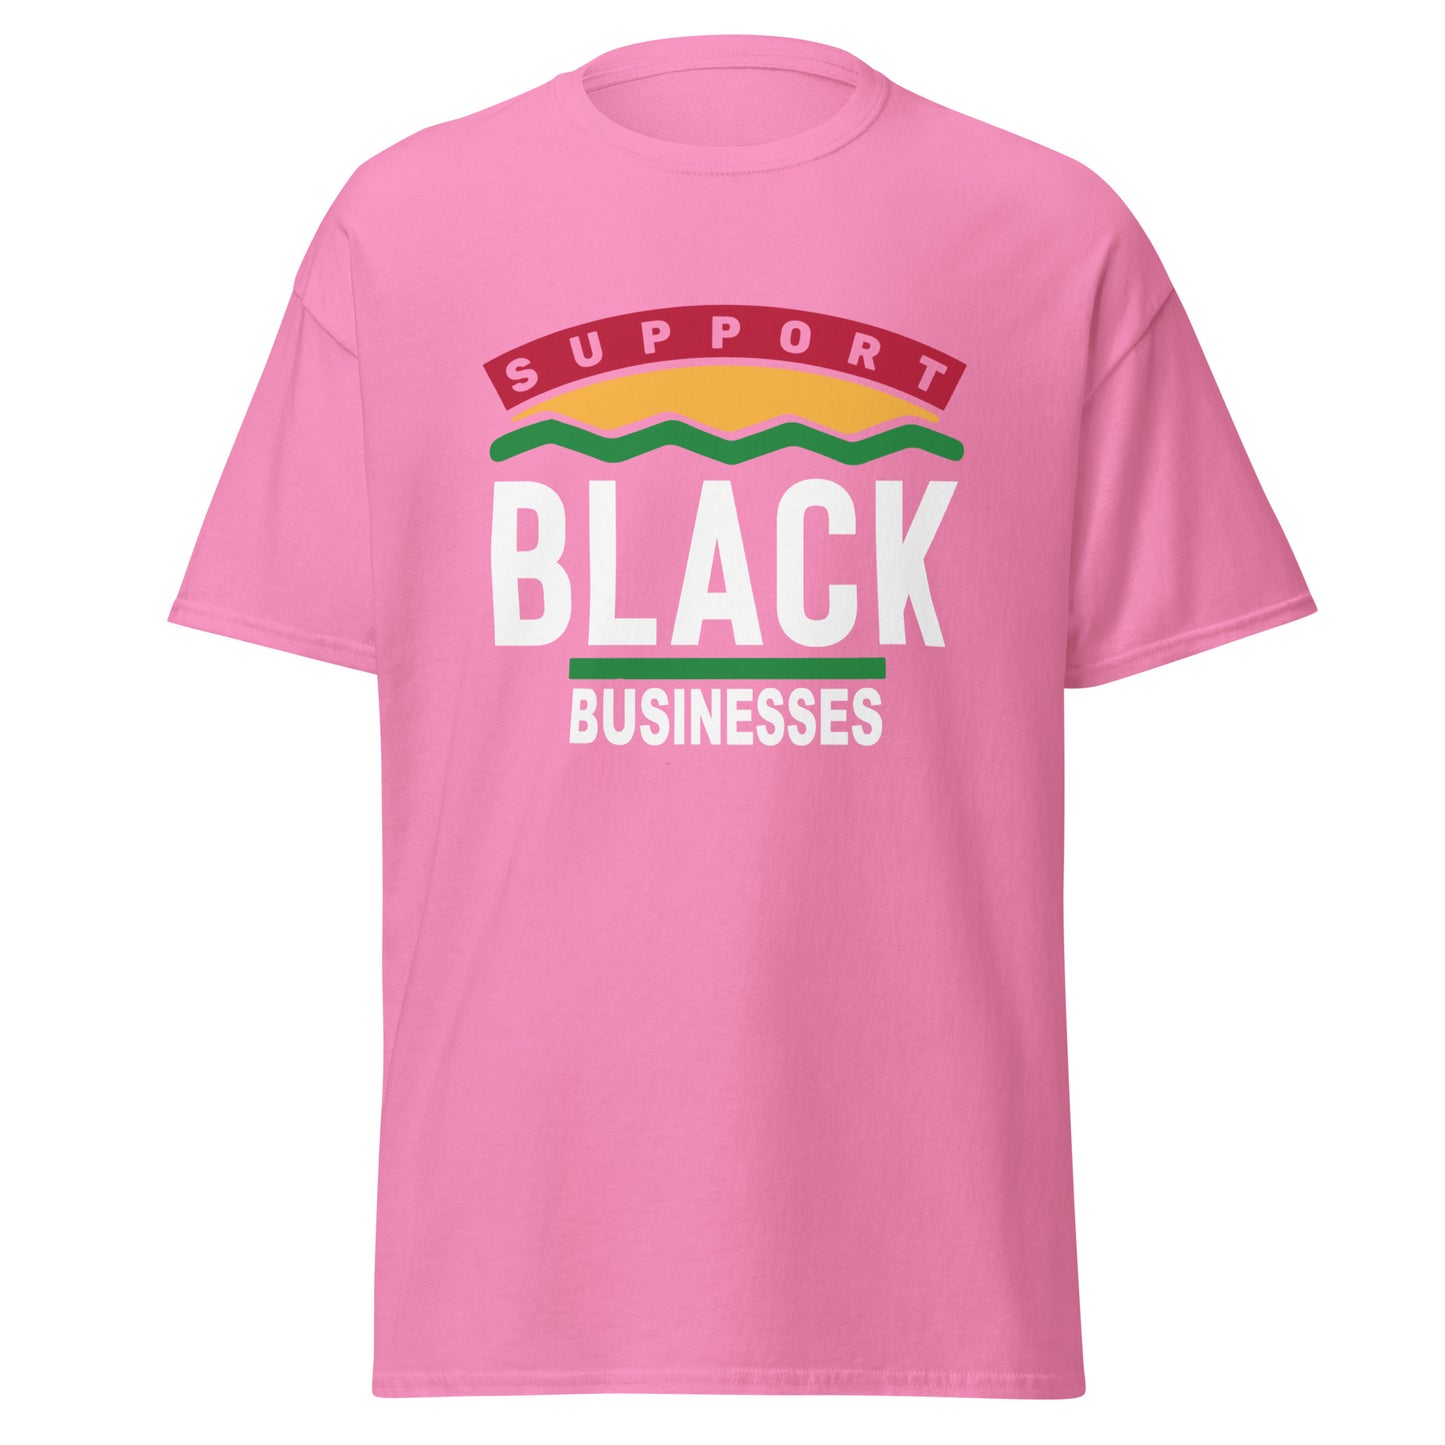 NEW SUPPORT BLACK BUSINESS!!!